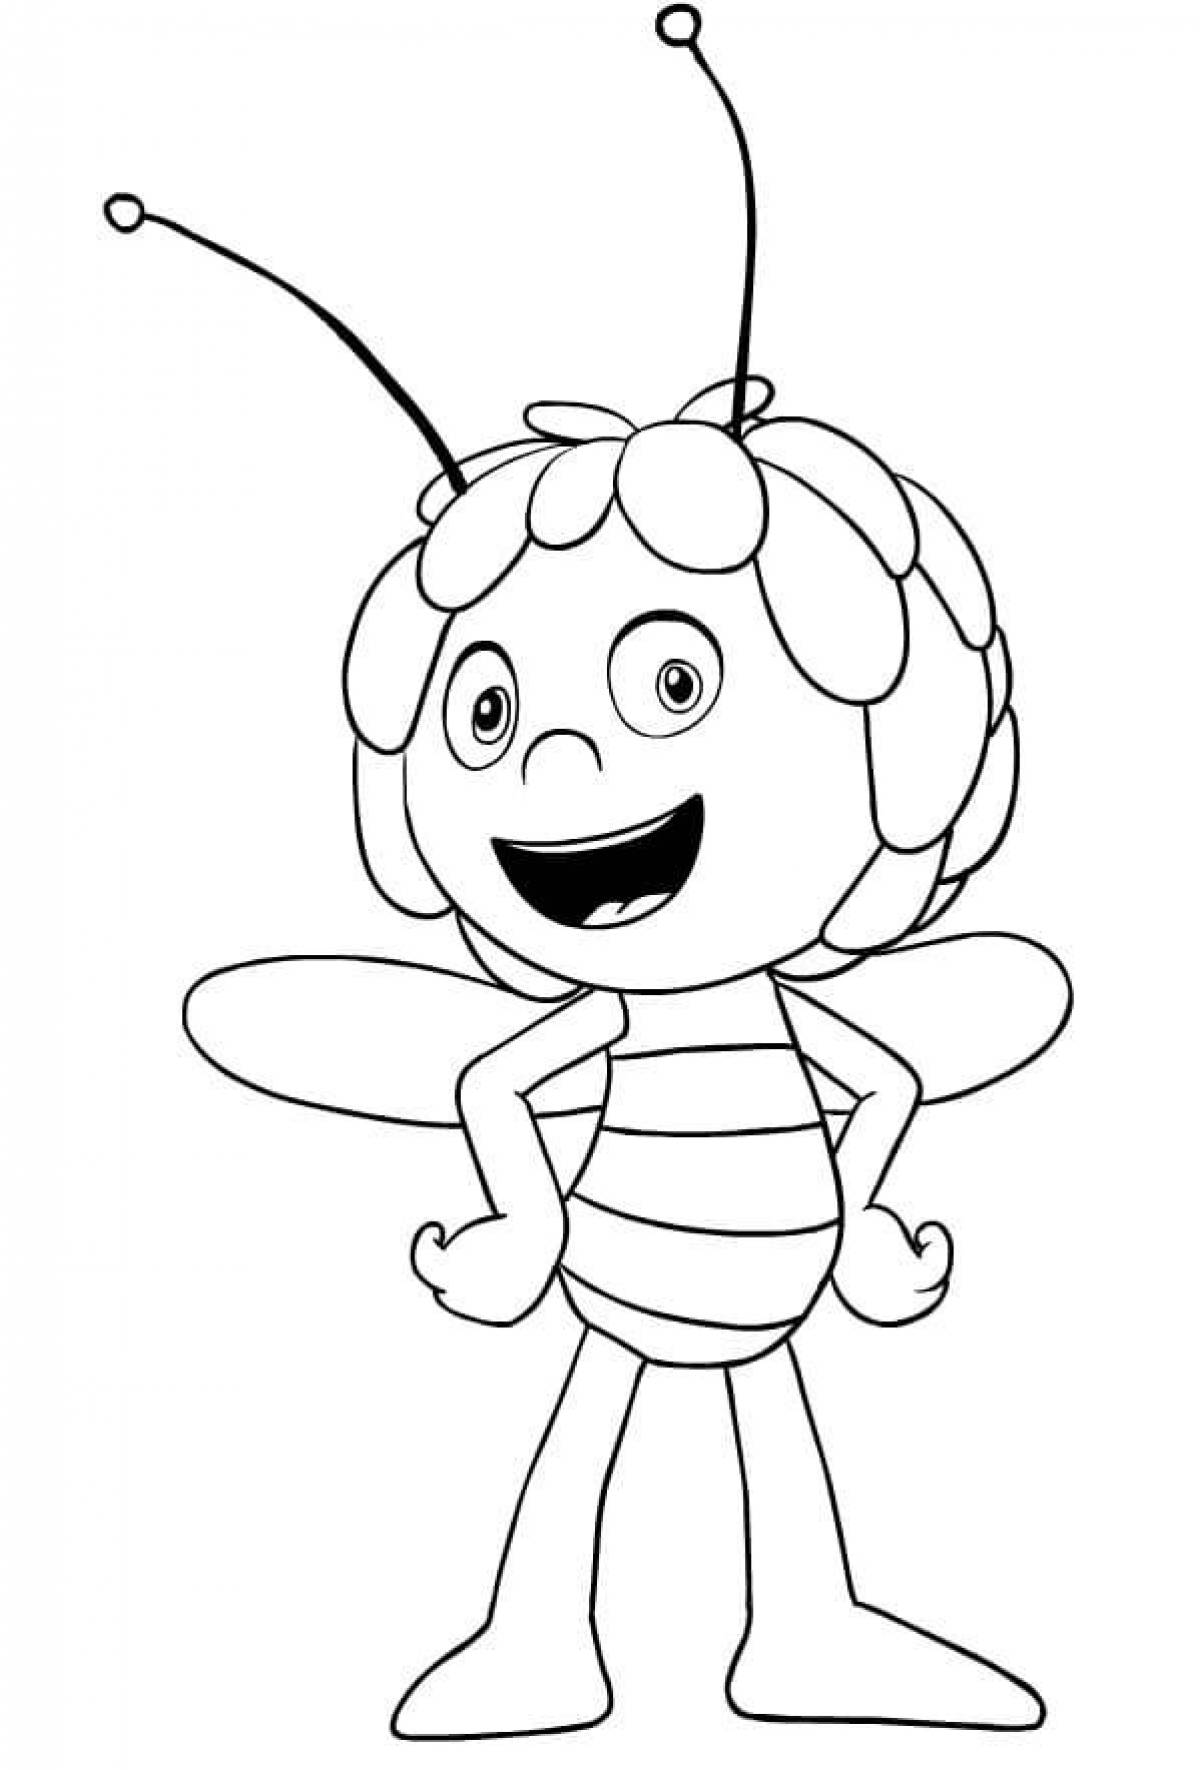 Cute bee coloring page